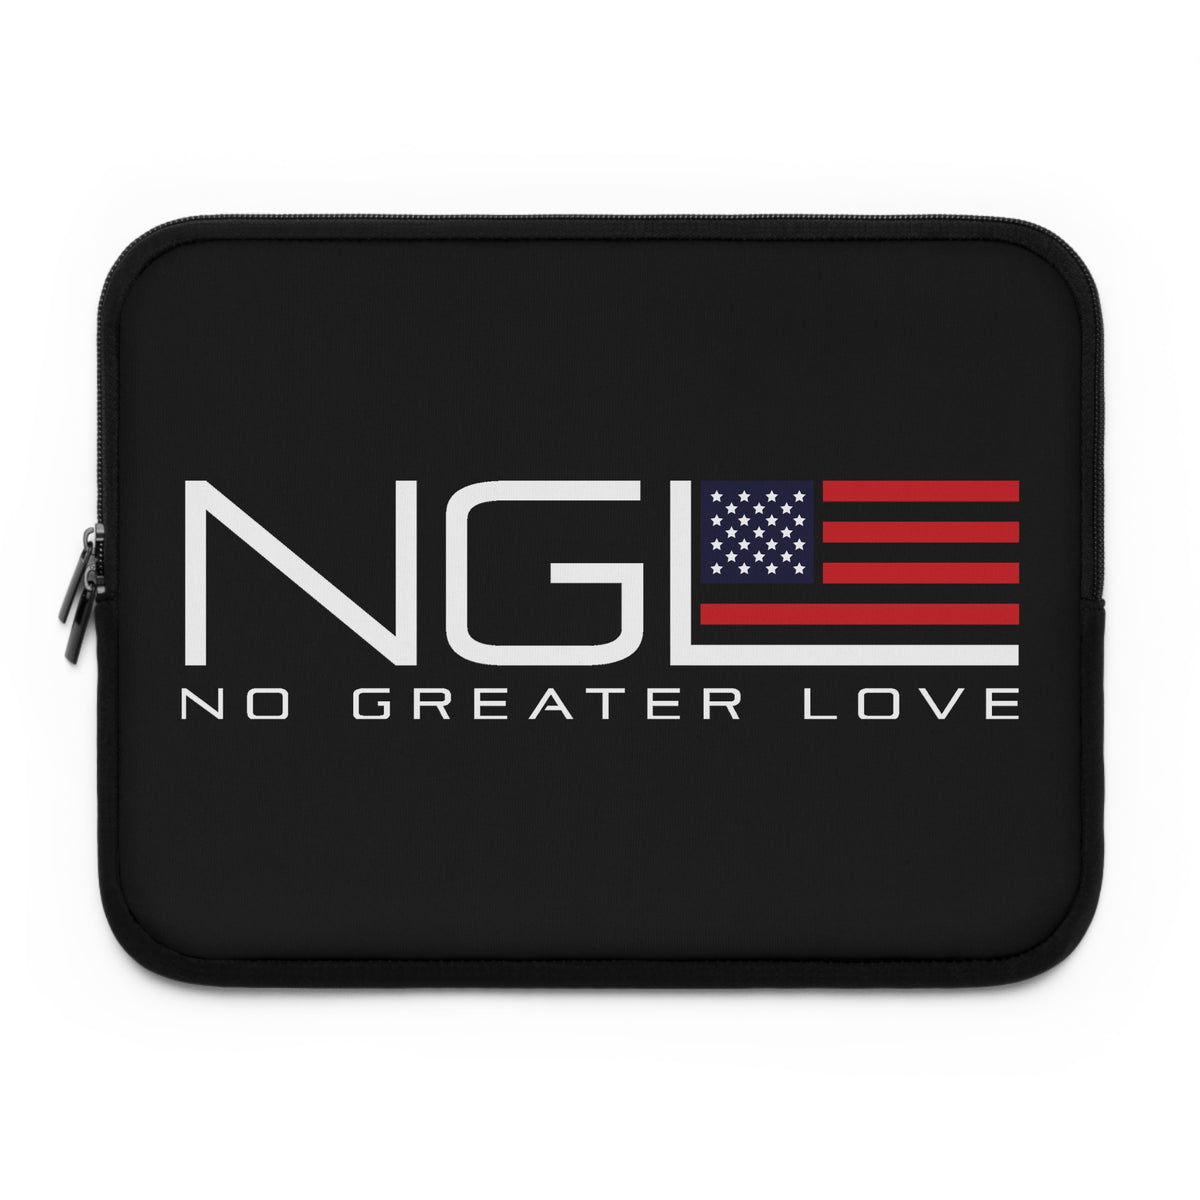 No Greater Love Laptop Sleeve